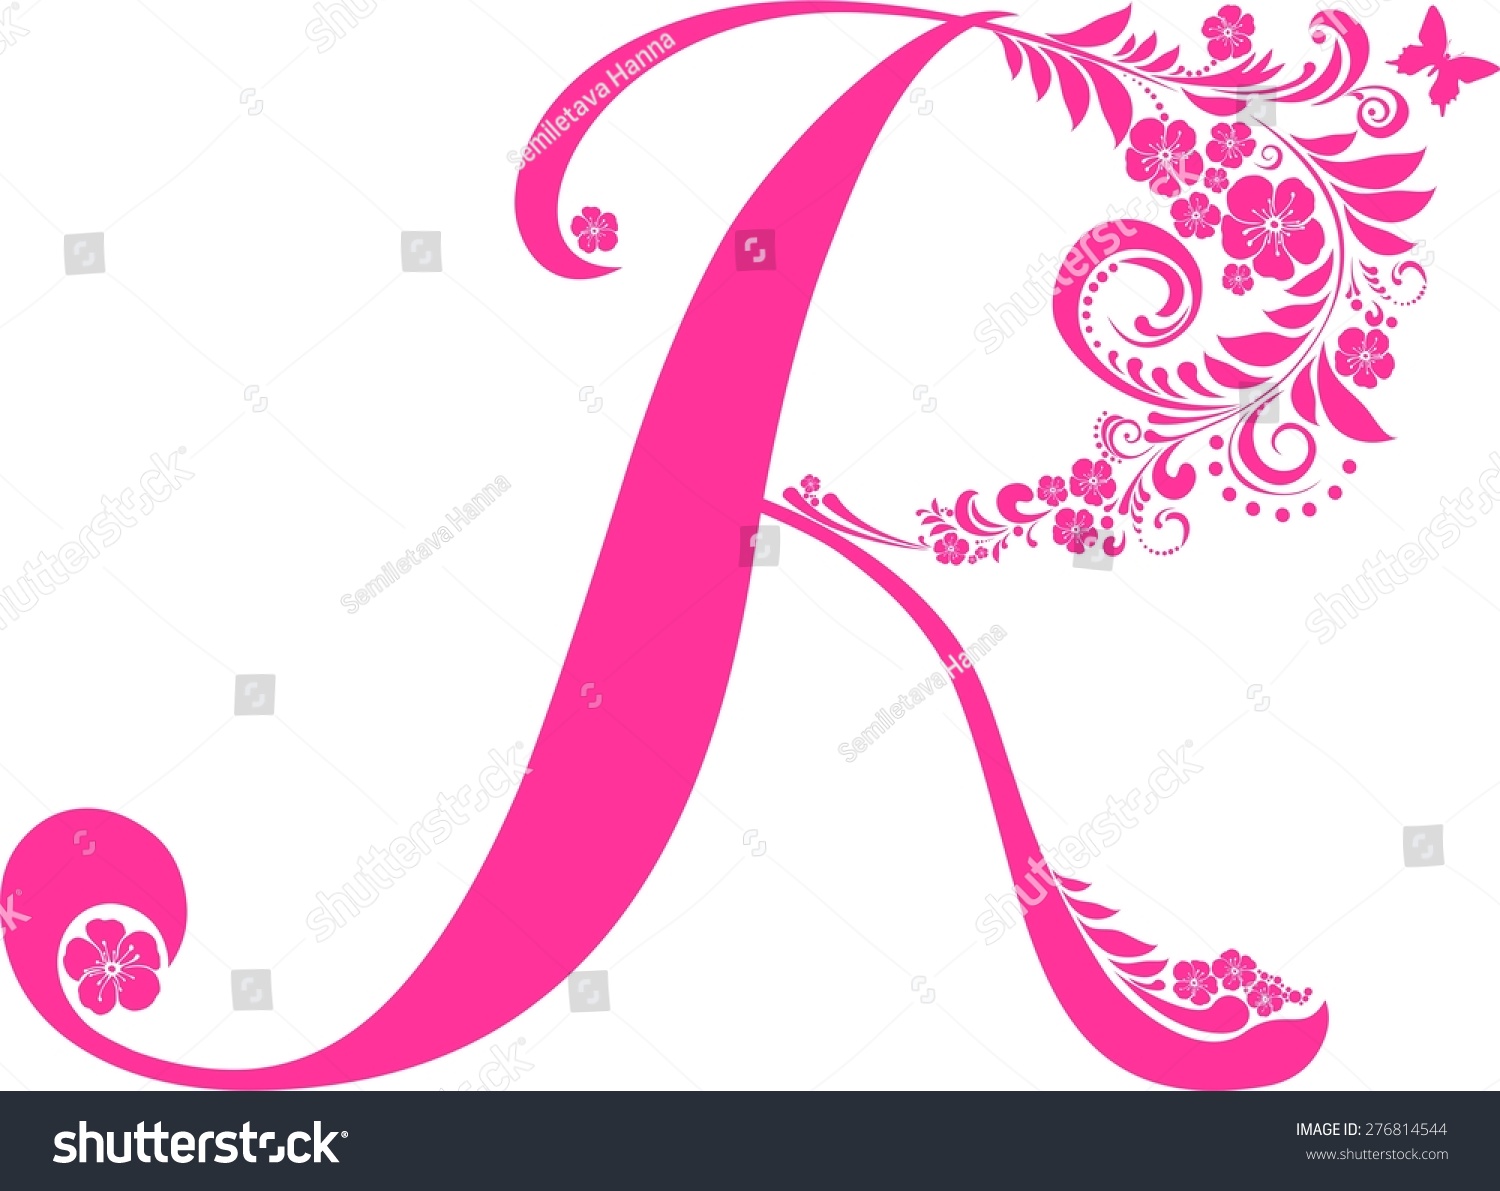 Royalty Free Stock Illustration Of Letter R Isolated On White